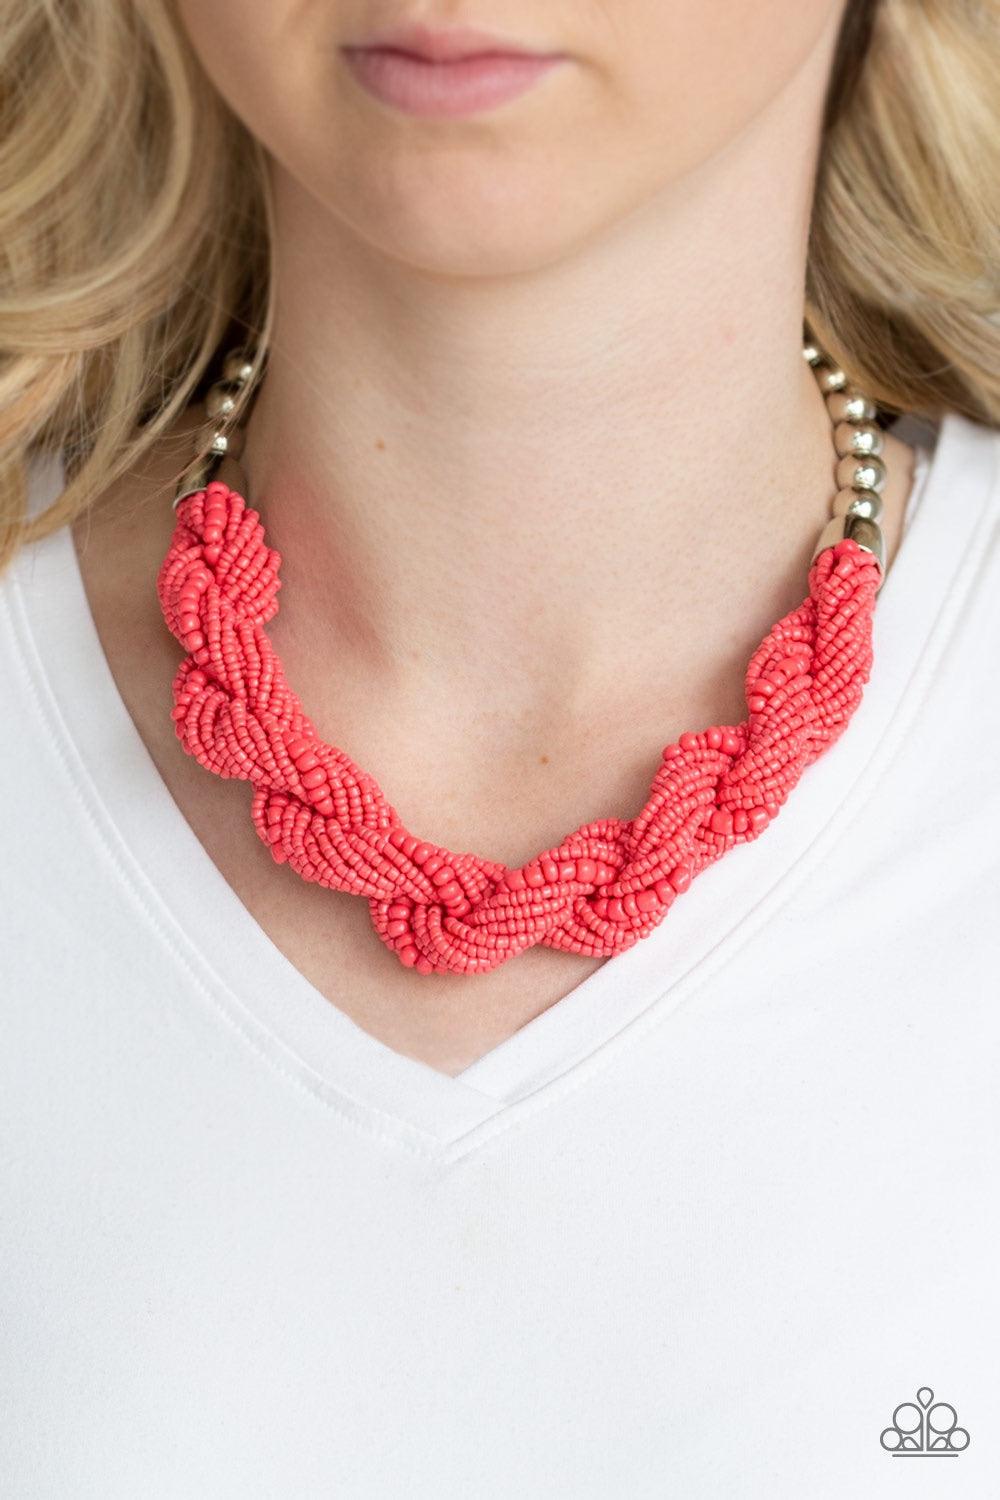 Paparazzi Accessories Savannah Surfin - Orange Glistening silver beads give way to strands of twisted Living Coral seed beads below the collar for a summery flair. Features an adjustable clasp closure. Jewelry